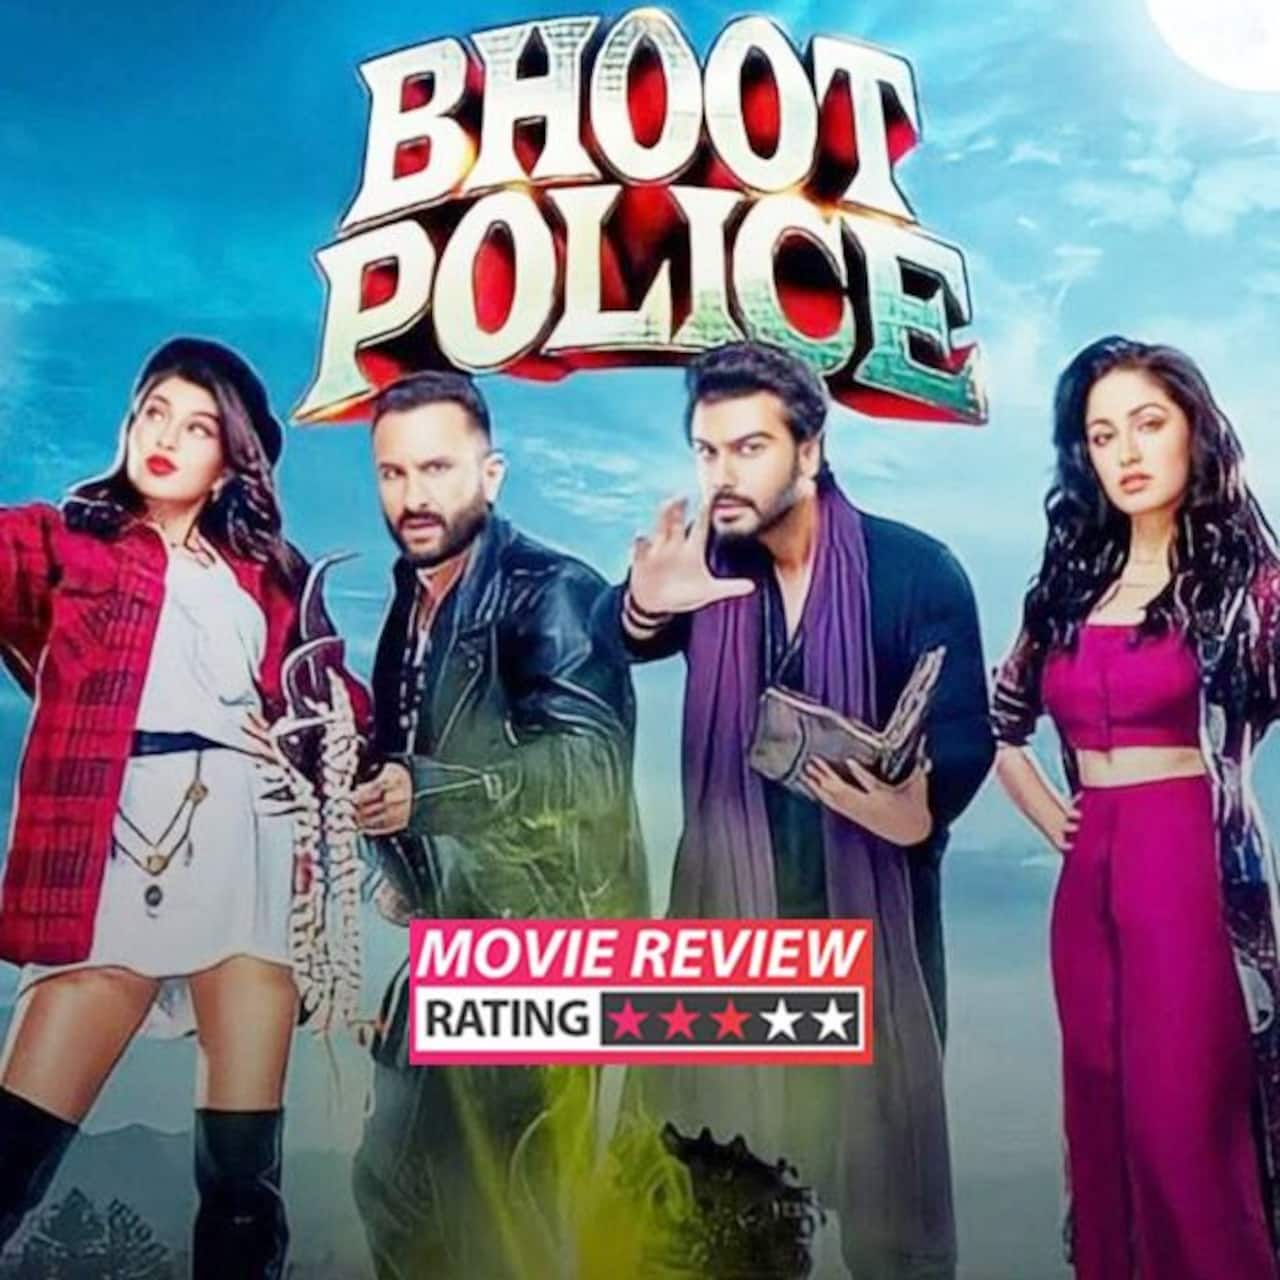 Bhoot Police movie review: Saif Ali Khan-Arjun Kapoor's desi take on Scooby Doo makes for some harmless, spooky fun